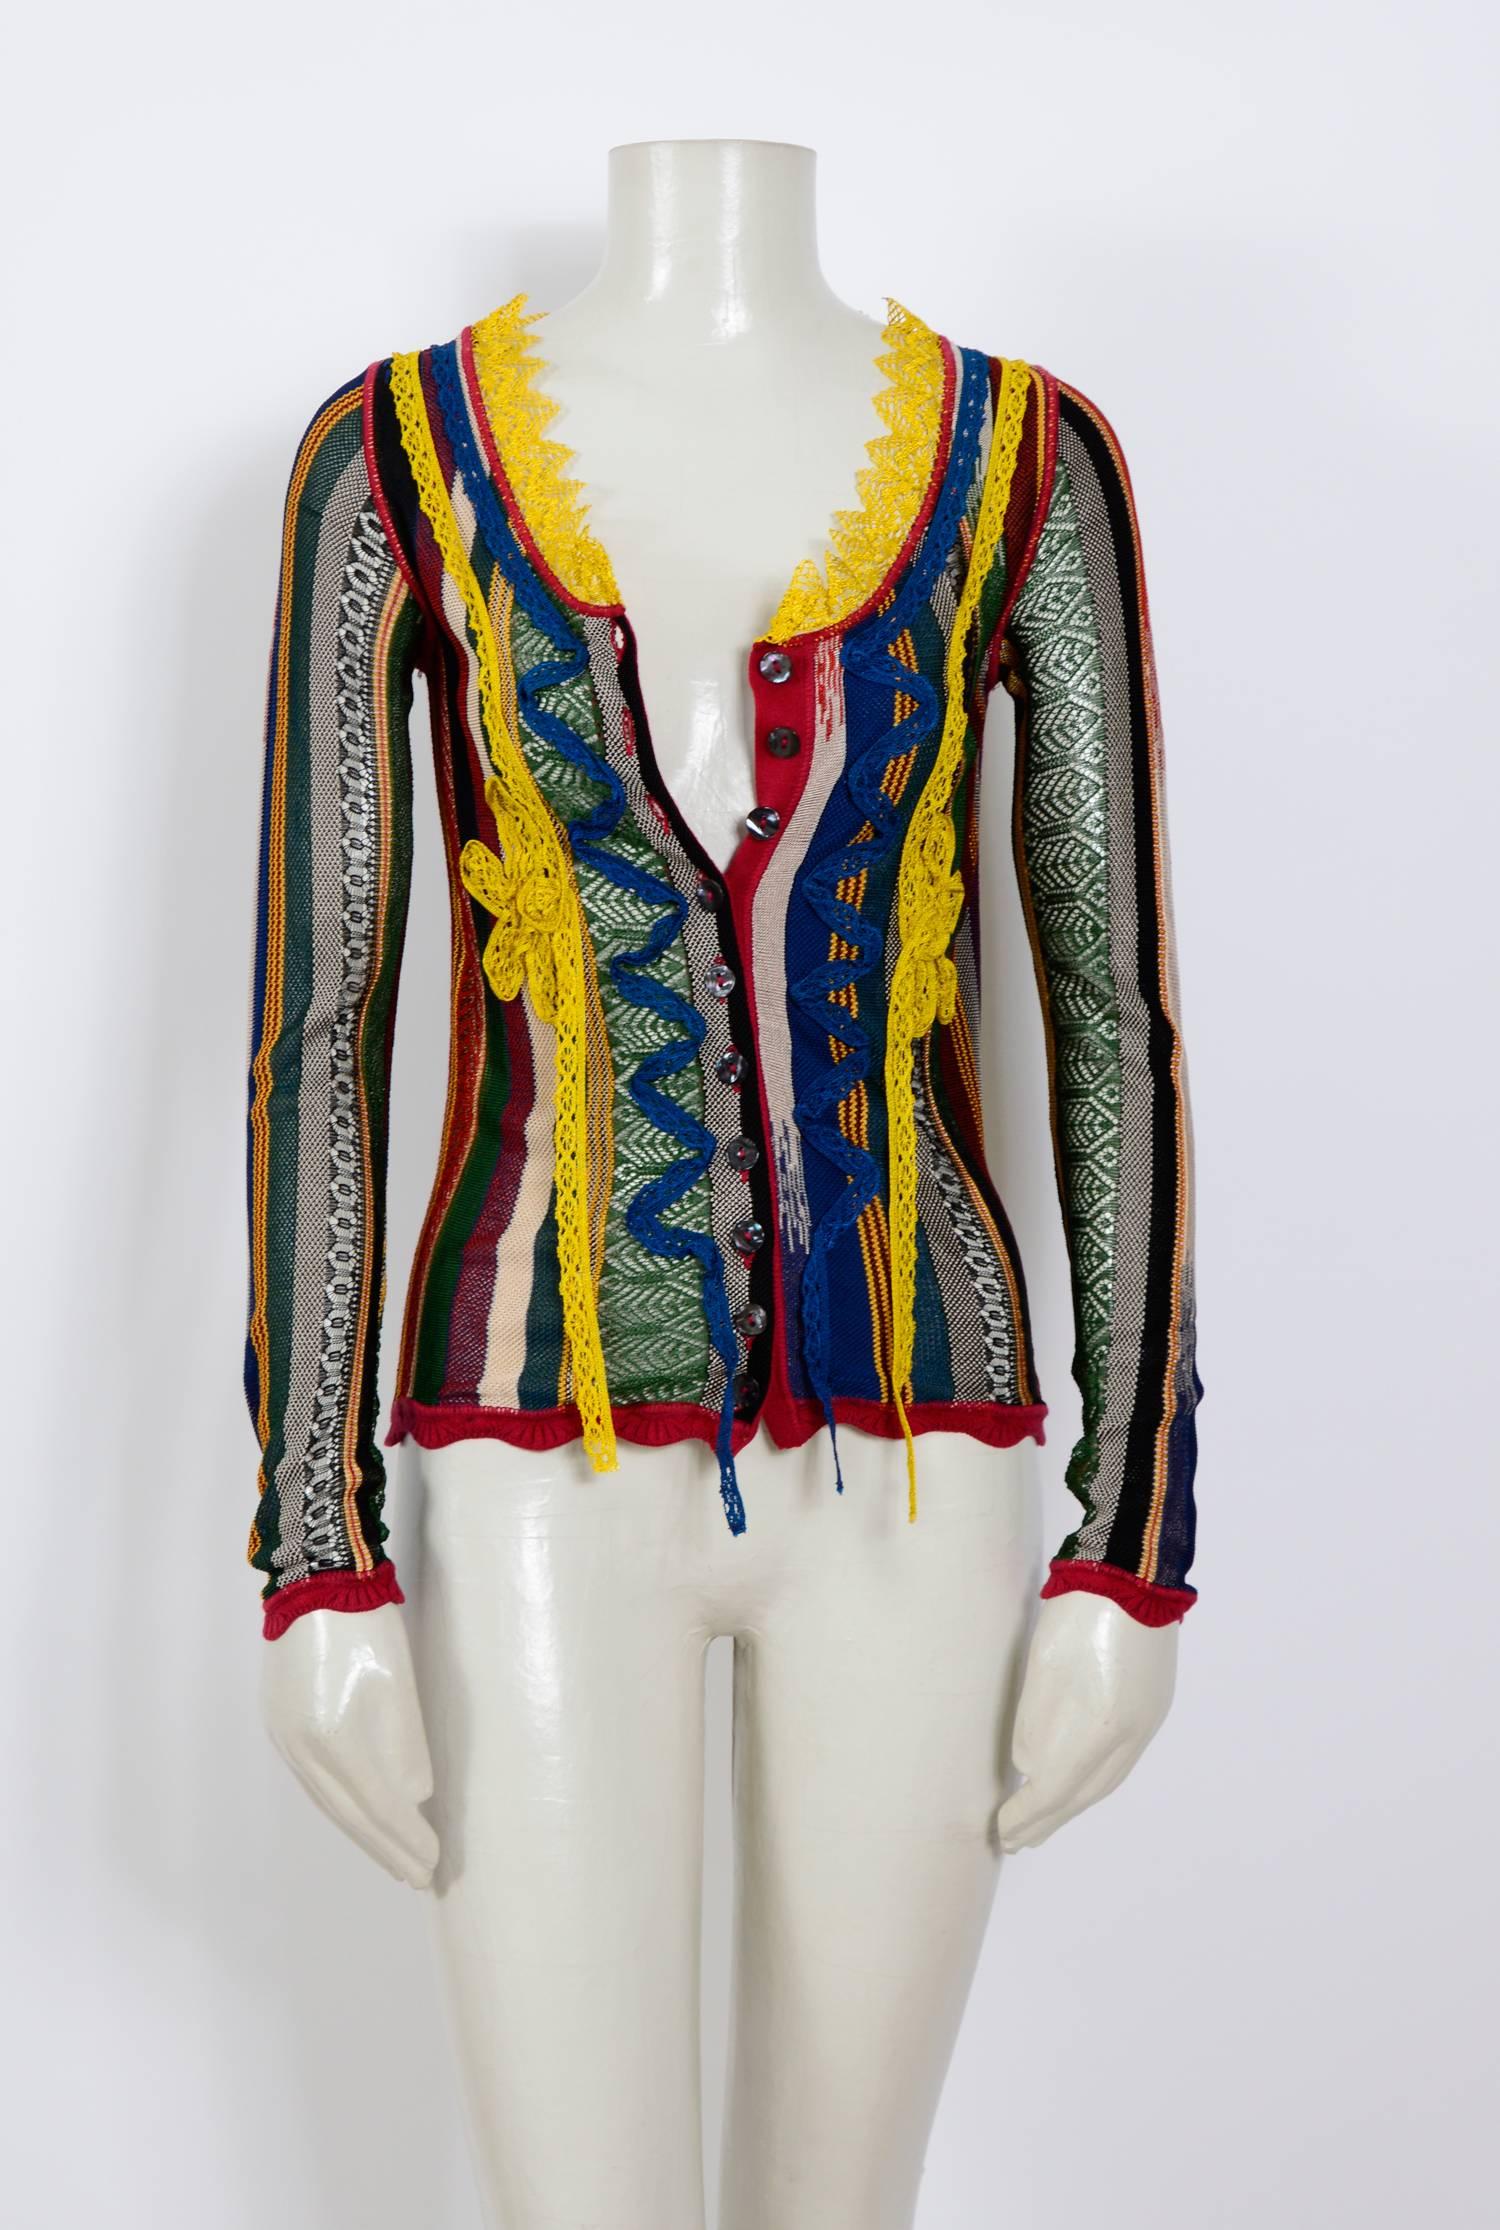 Vintage Jean Paul Gaultier knitwear at his best is this beautiful cardigan.
Measurements taken flat: Bust 14,5inch/37cm(x2) - Waist 14inch/36cm(x2) - Sleeve 25inch/64cm - Total length 21inch/53cm
